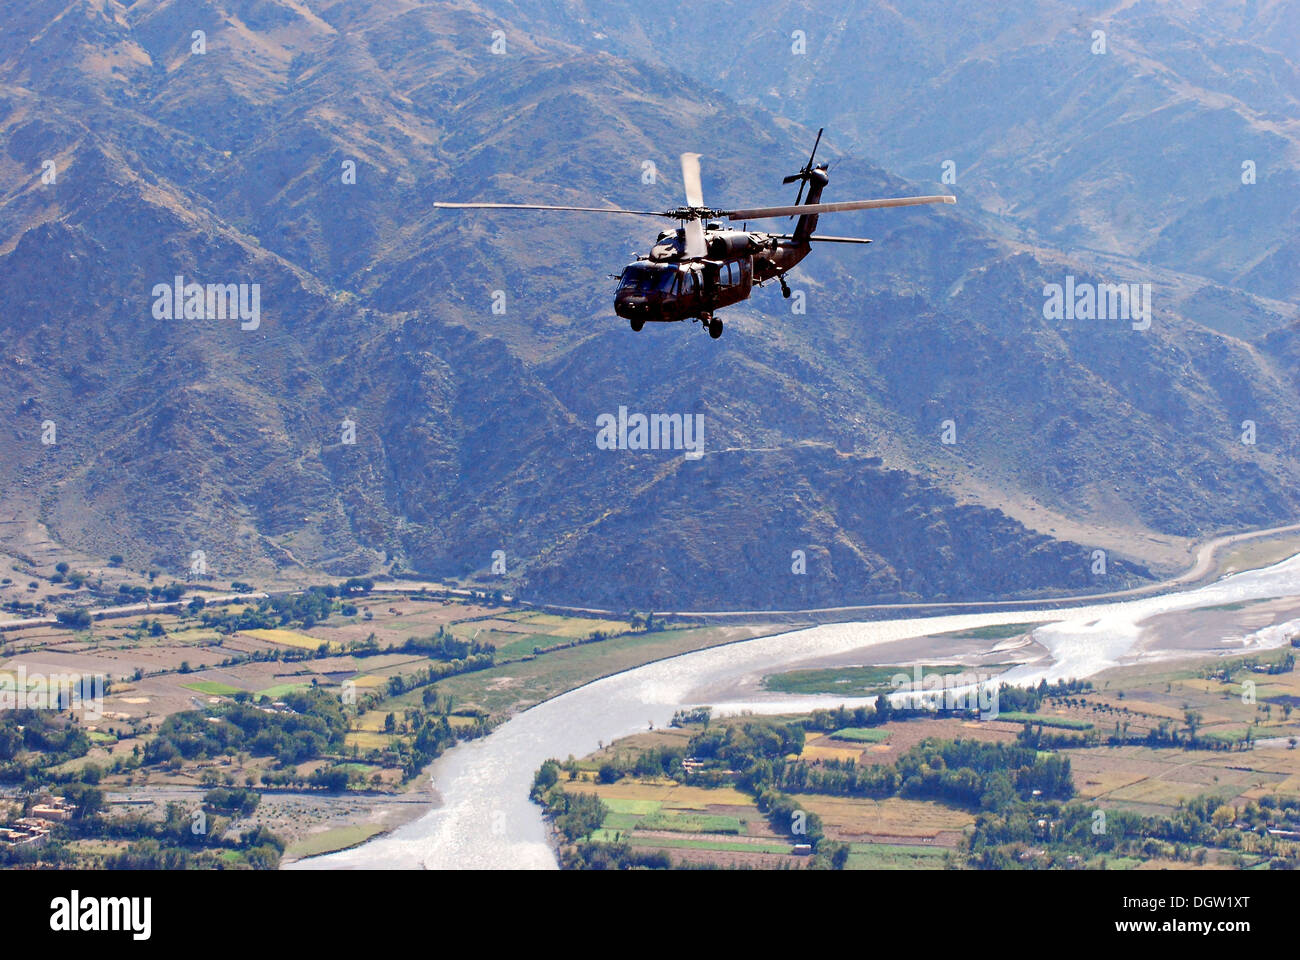 A U.S. Army UH-60L Black Hawk helicopter flies over a village October 17, 2013 in Kunar province, Afghanistan. Stock Photo